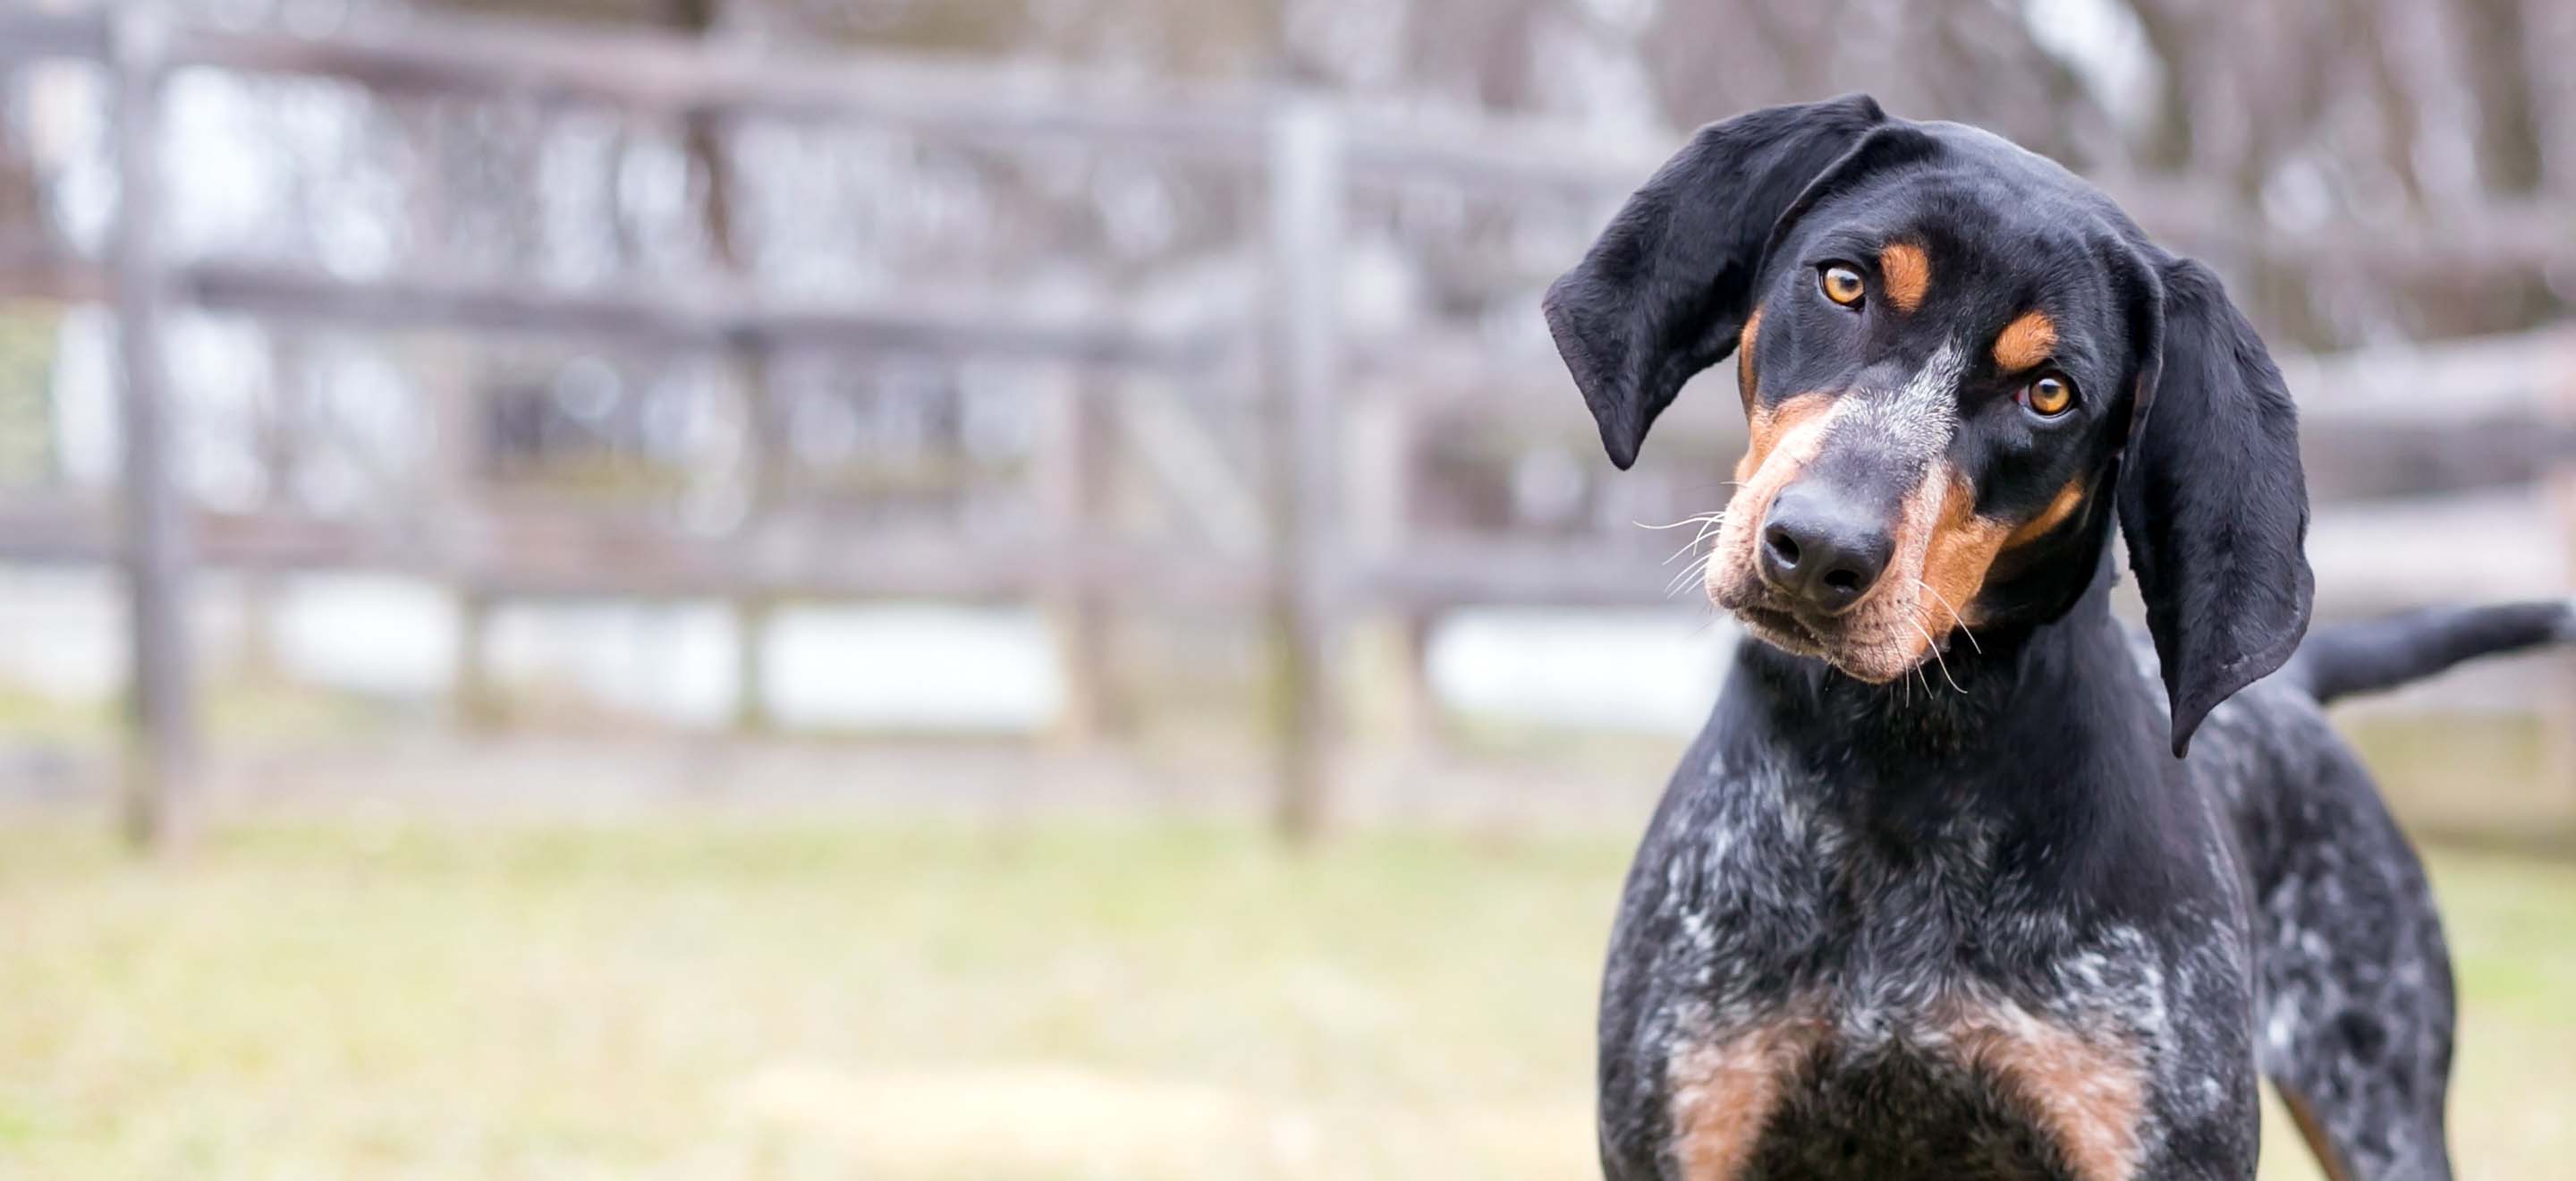 A Bluetick Coonhound dog with its head cocked standing in a fenced field image